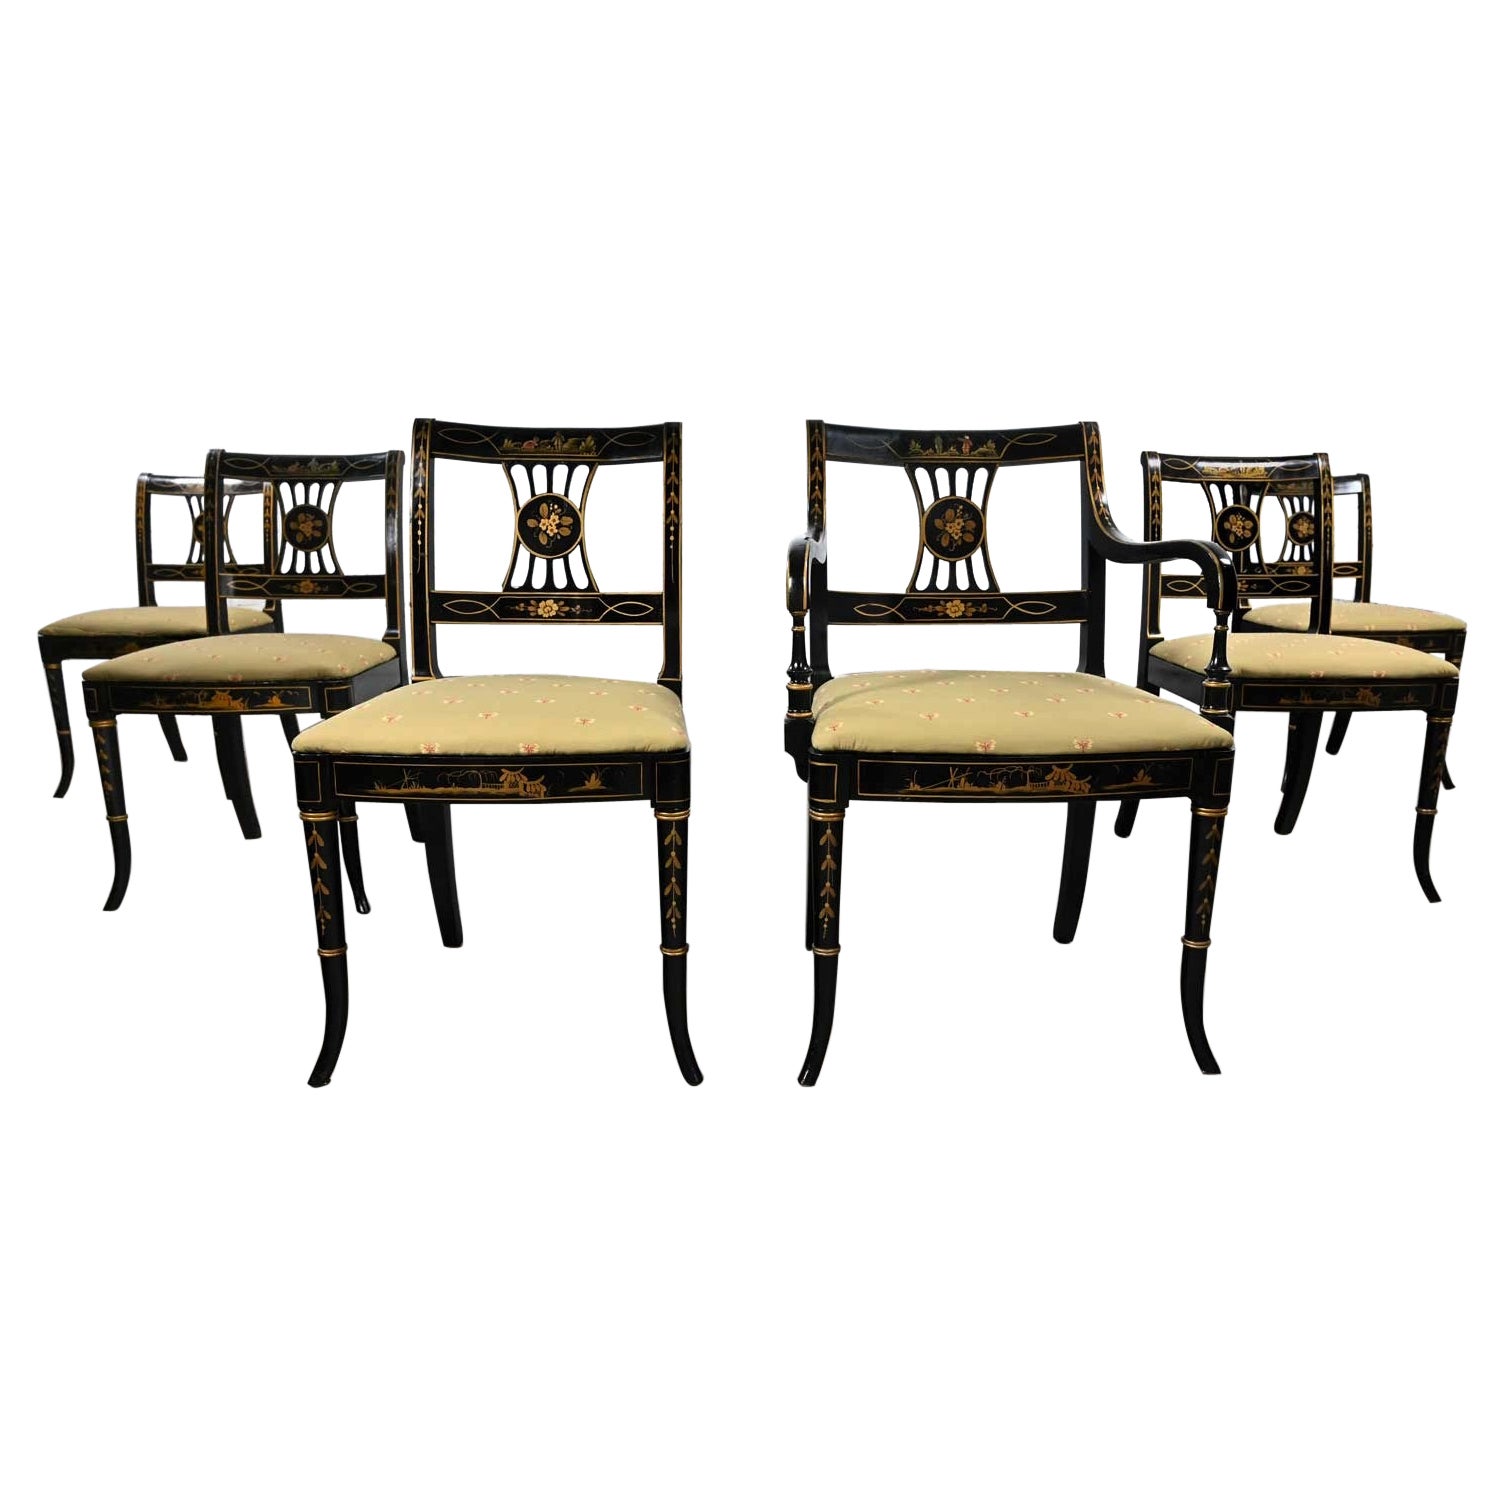 Chinoiserie Regency Style Union National Black & Gilt Dining Chairs Set of 6